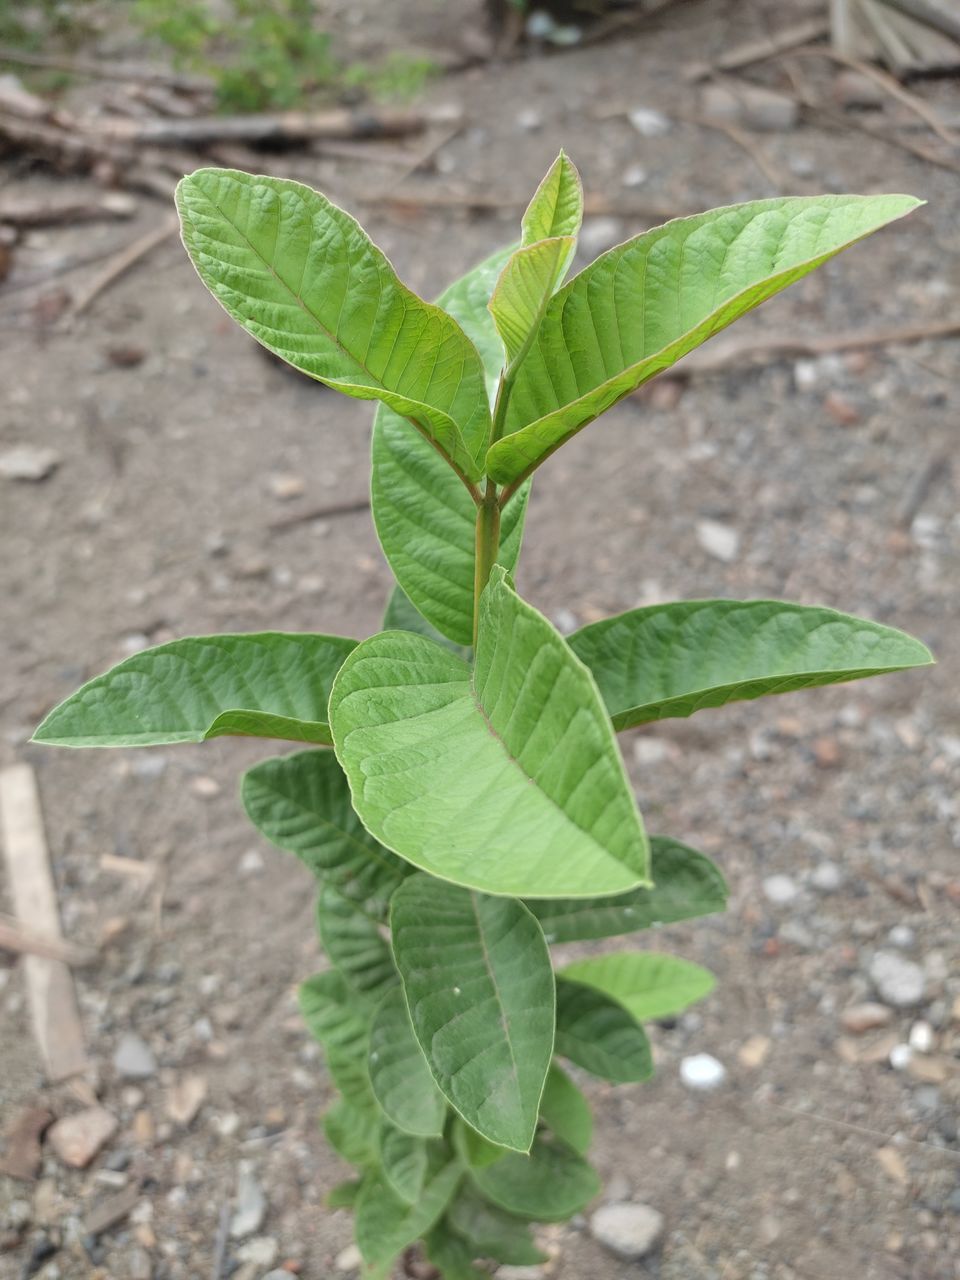 leaf, plant part, green, plant, nature, growth, day, close-up, no people, flower, focus on foreground, outdoors, beauty in nature, produce, high angle view, tree, food, land, freshness, shrub, leaf vein